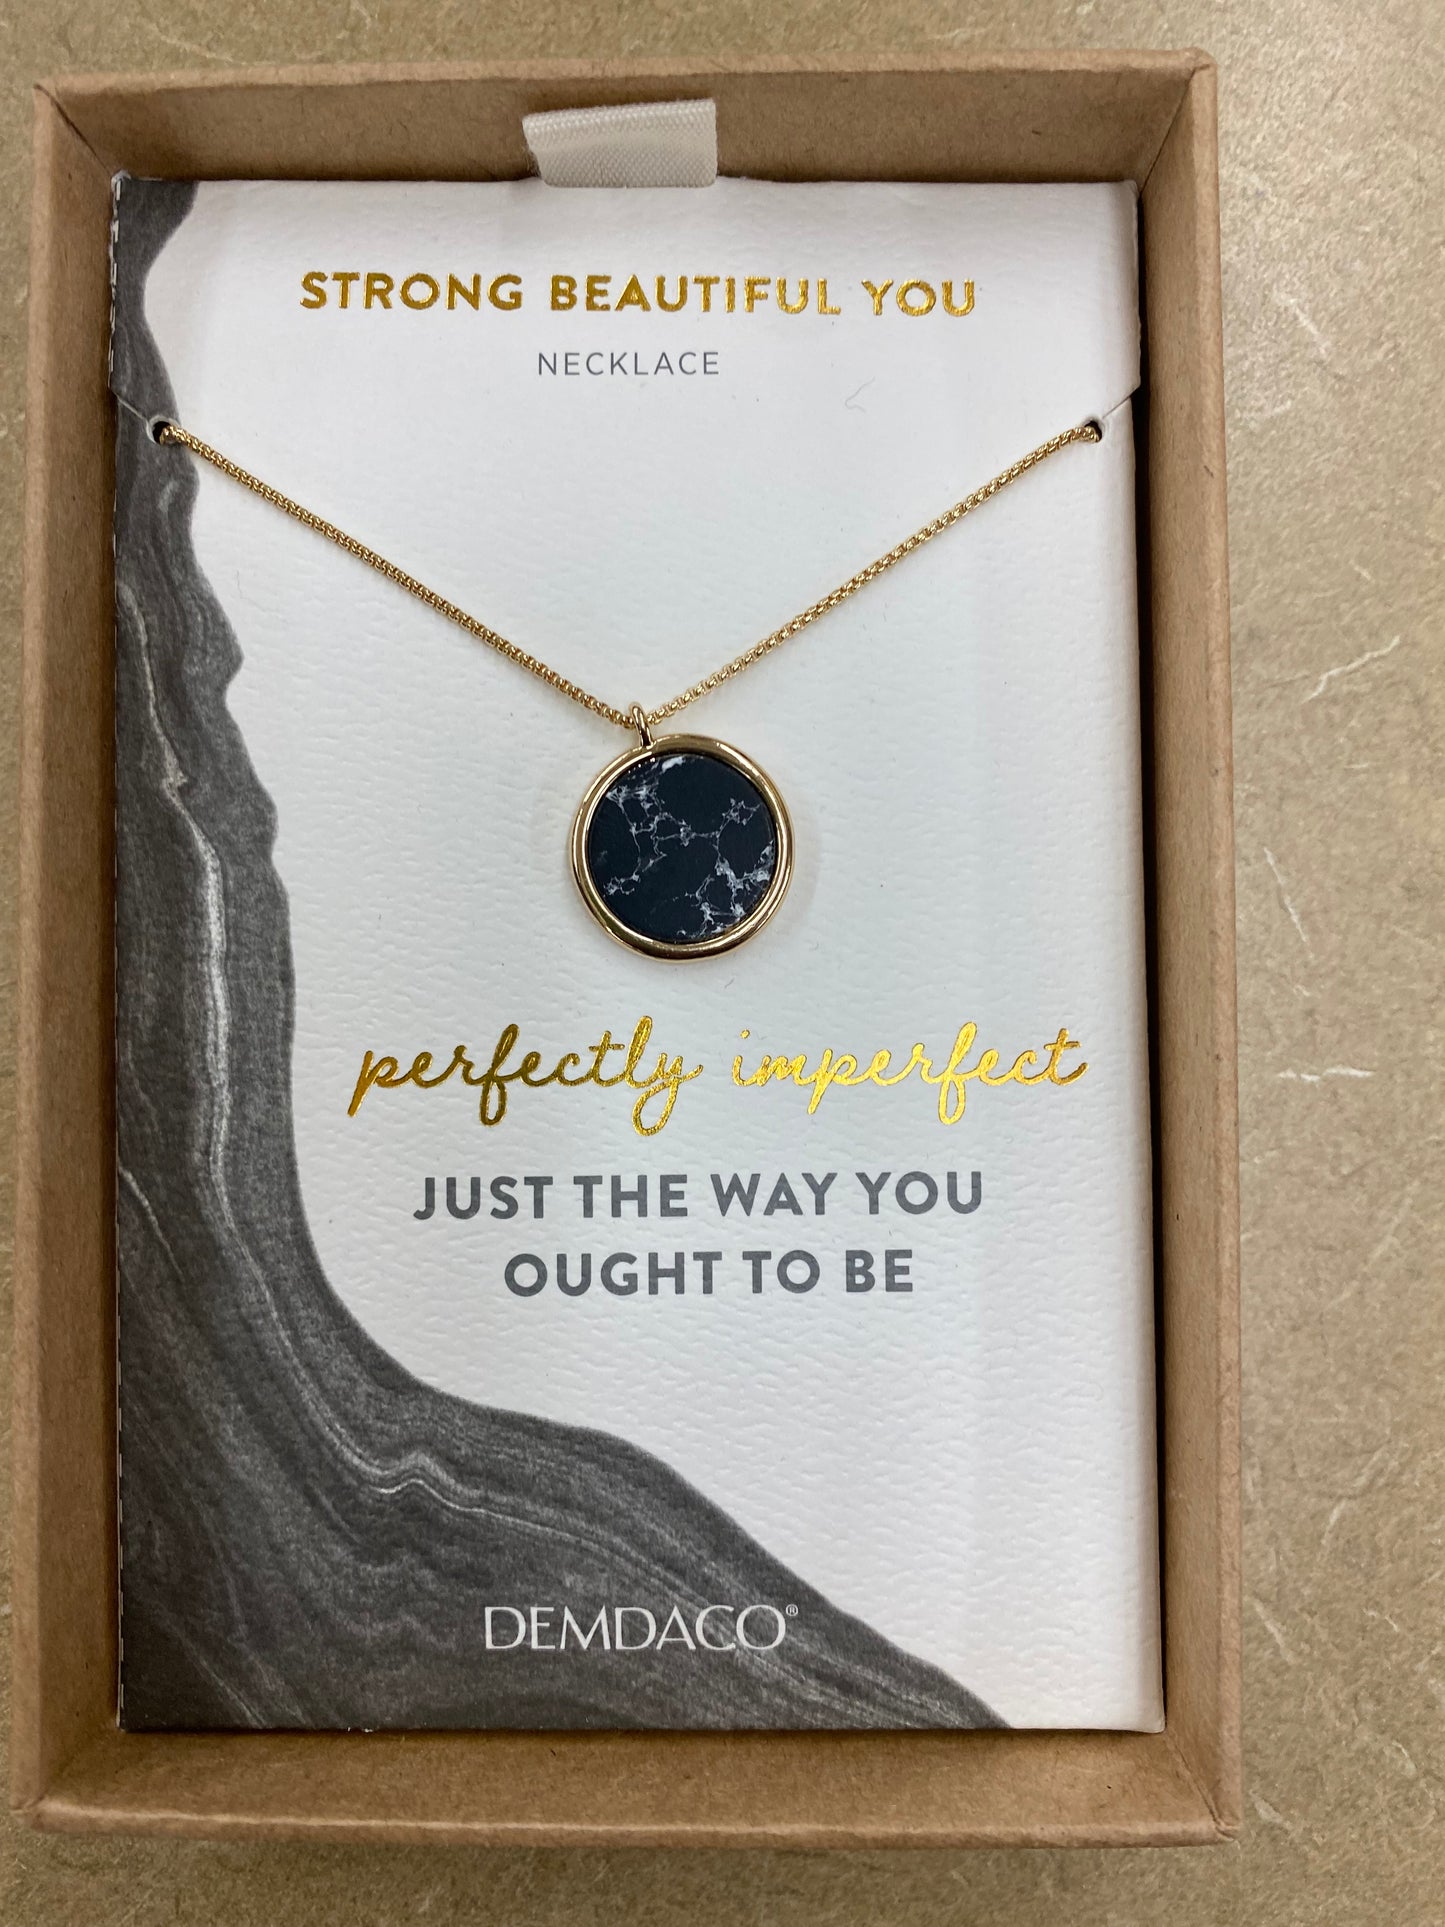 Strong Beautiful You Necklace